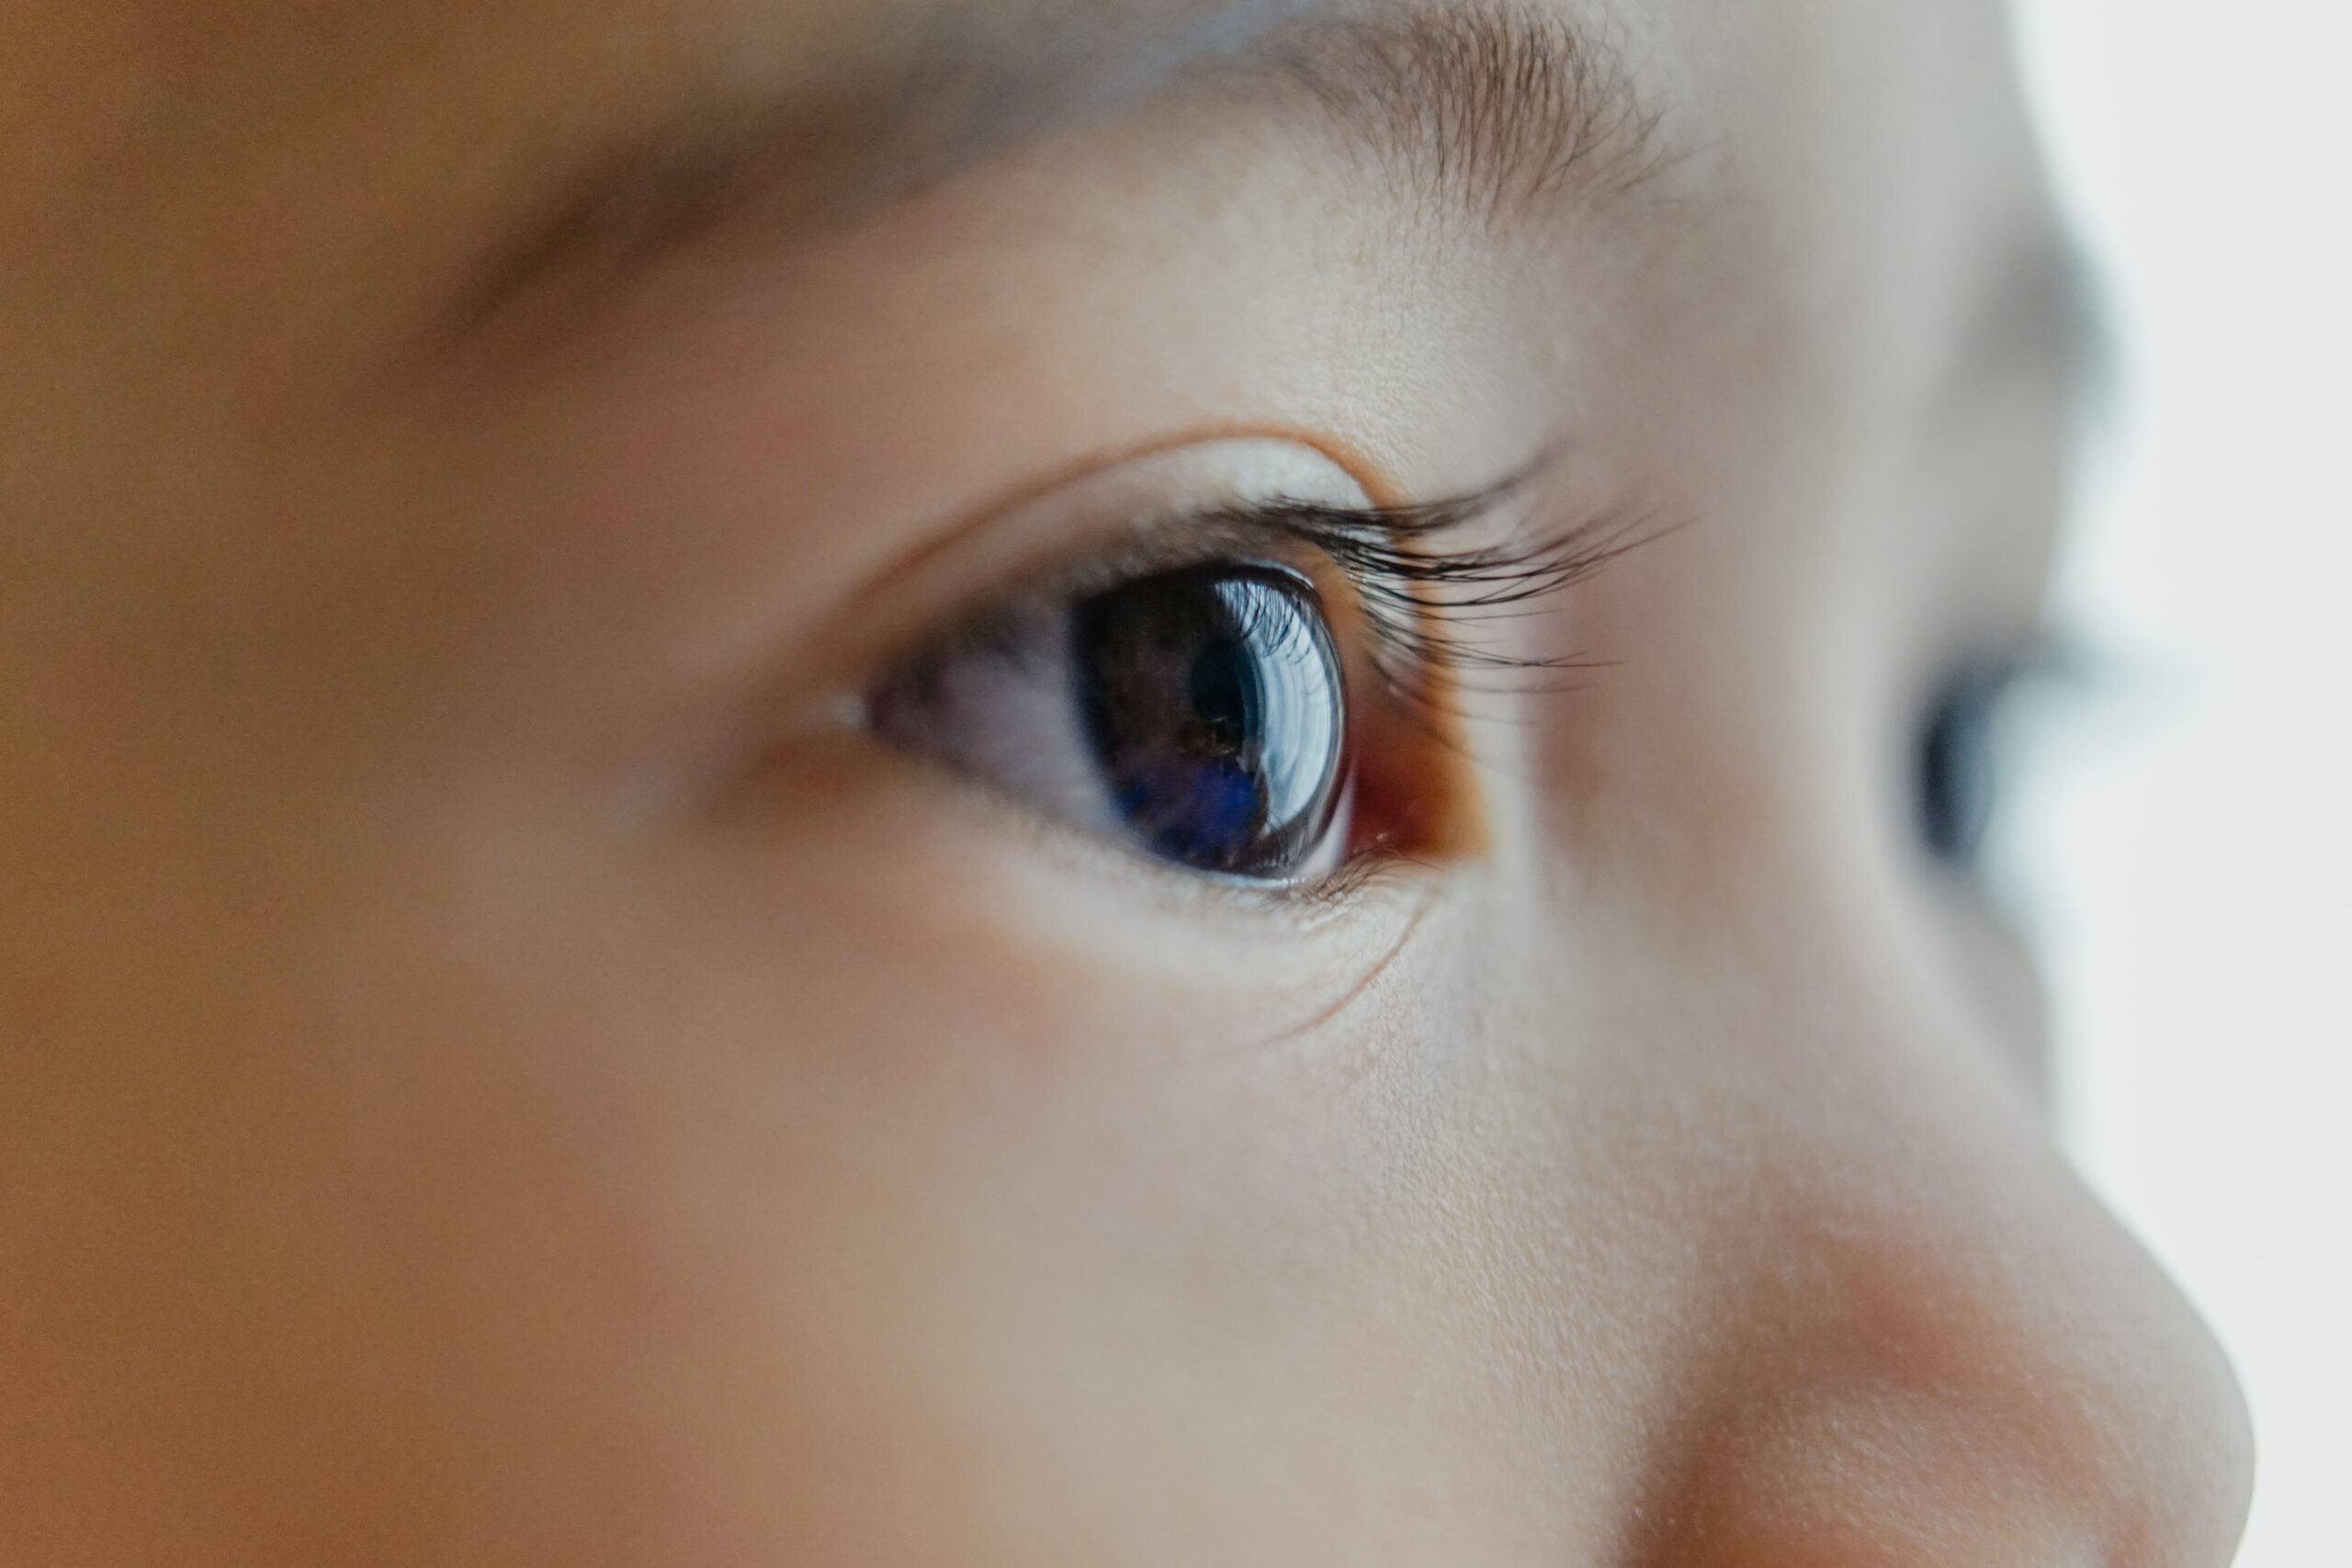 Is Your Child Ready for Contacts?